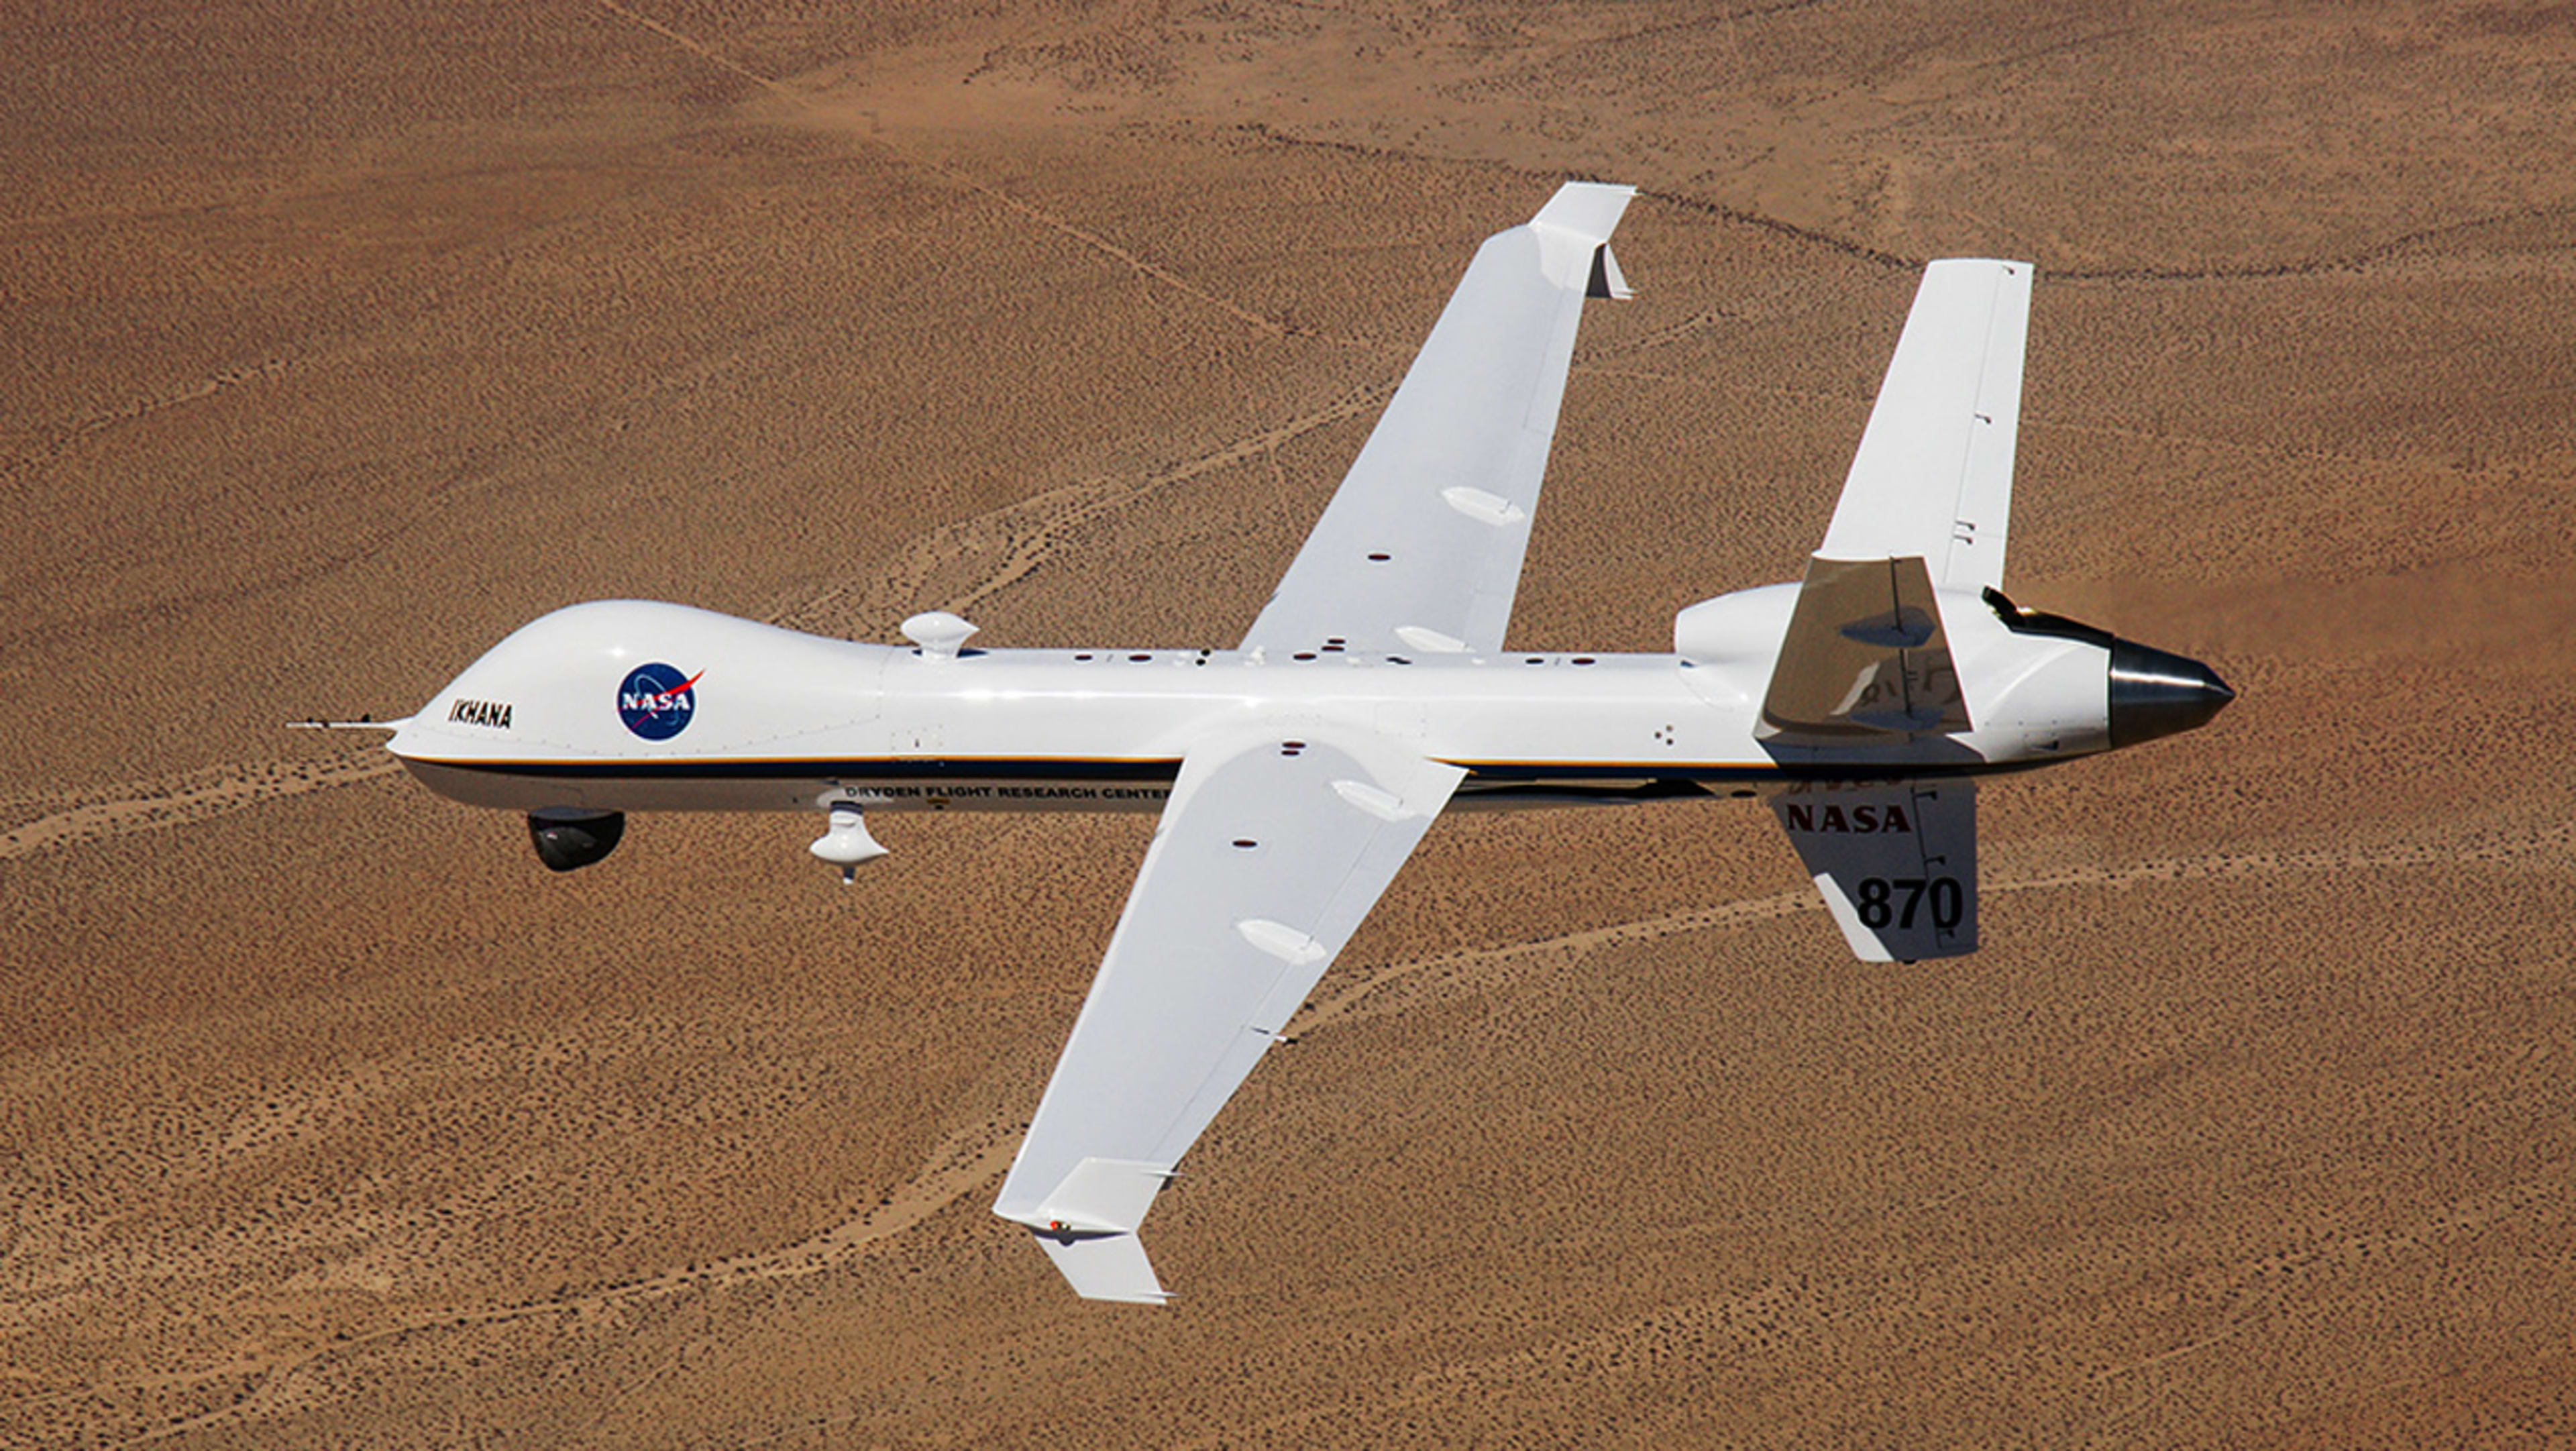 In a first, NASA’s Predator drone flew solo in US commercial airspace